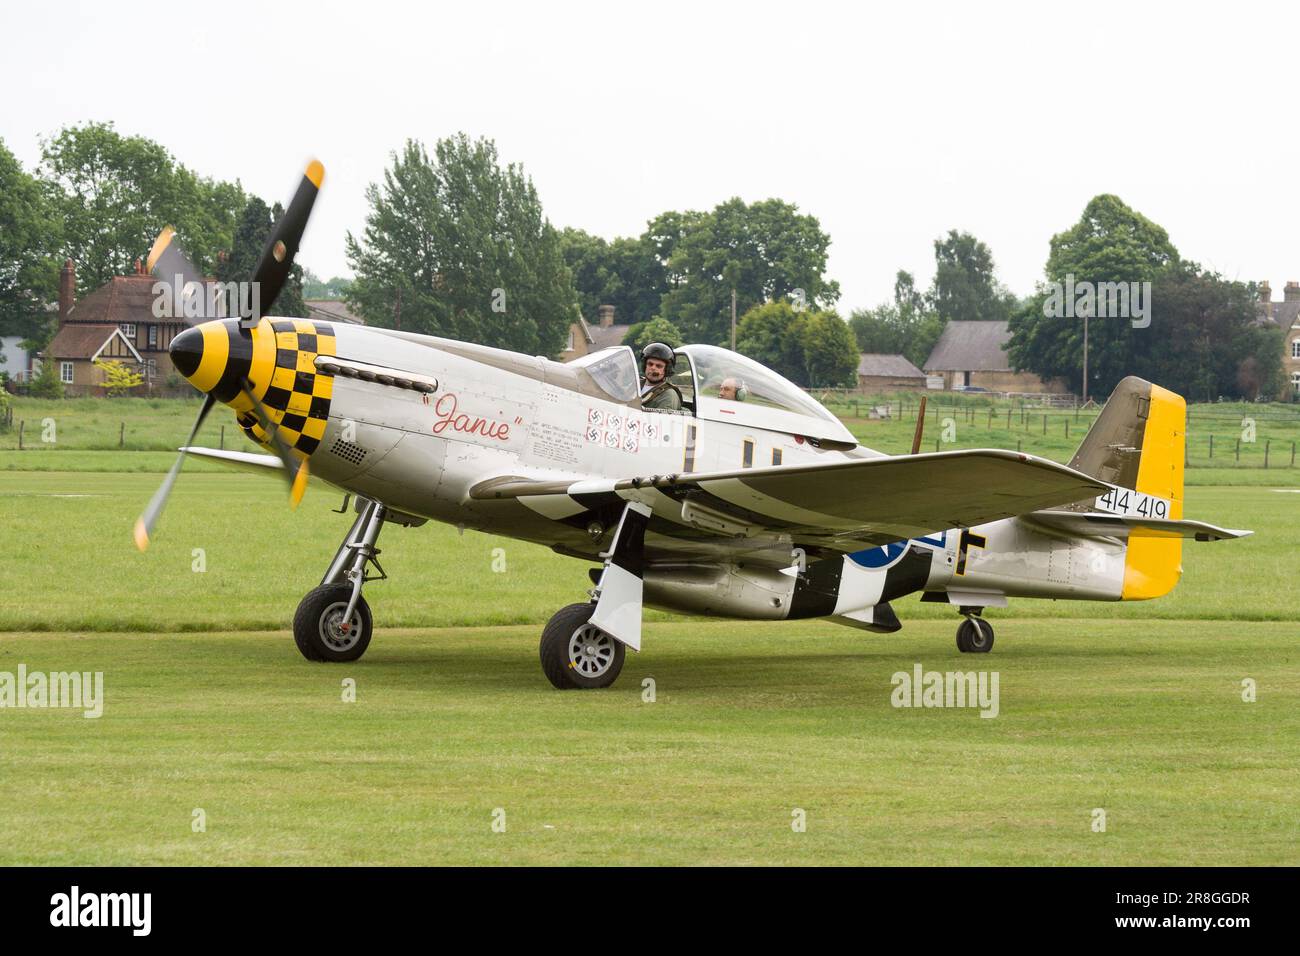 A Flying Day at the Shuttleworth Collection with North American P-51D Mustang 414-419 c/n 124-48271 'Janie' (G-MSTG), Old Warden, Bedfordshire in 2010 Stock Photo